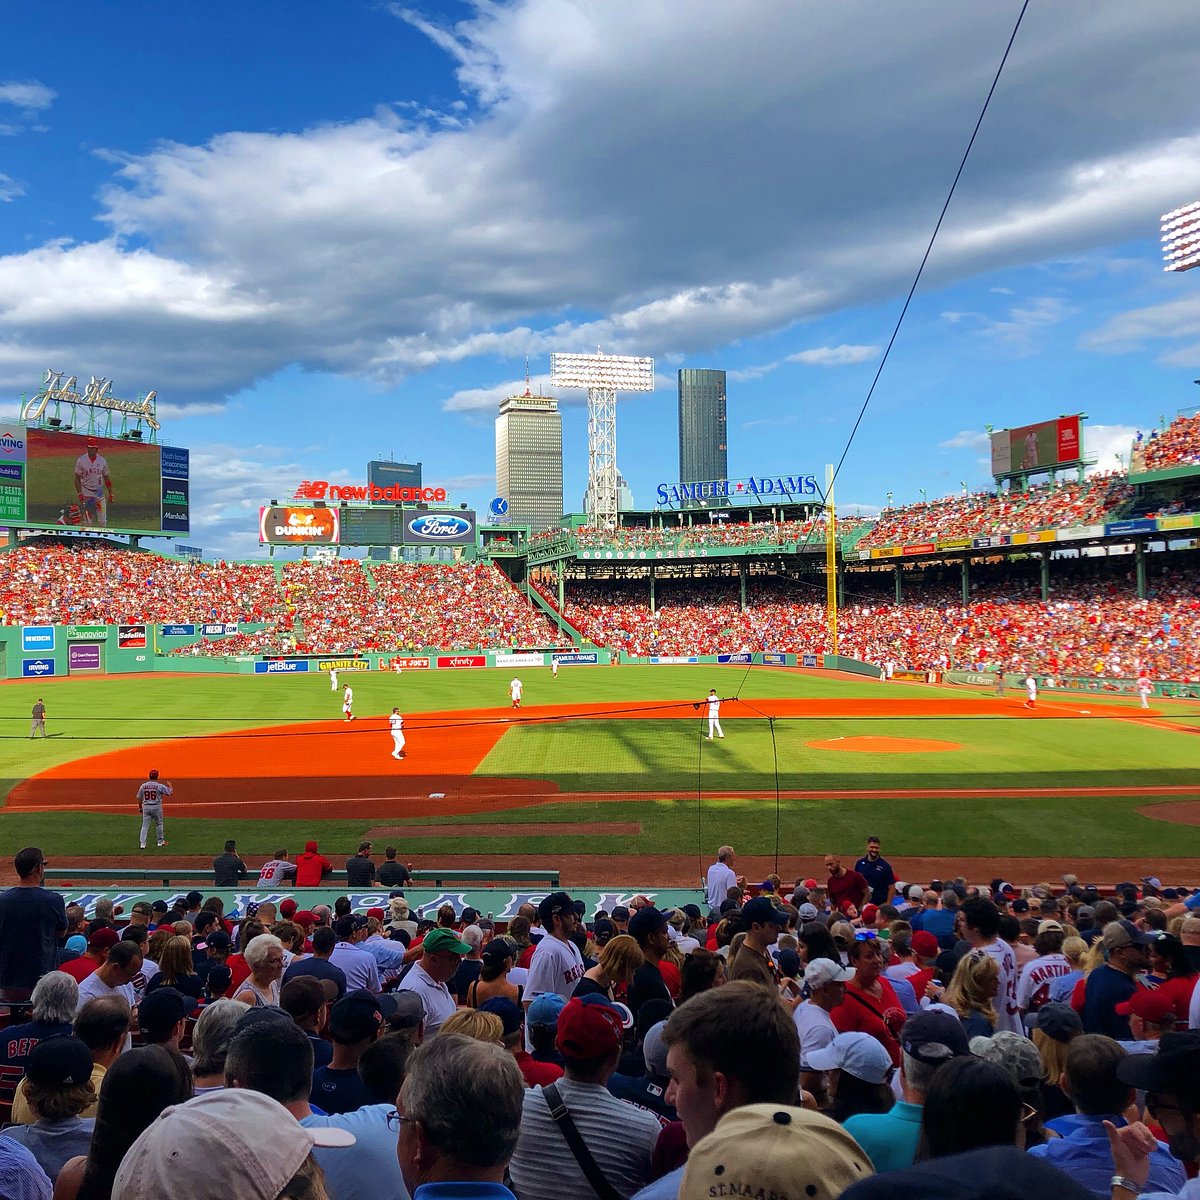 Iconic America, Should Fenway be a National Monument?